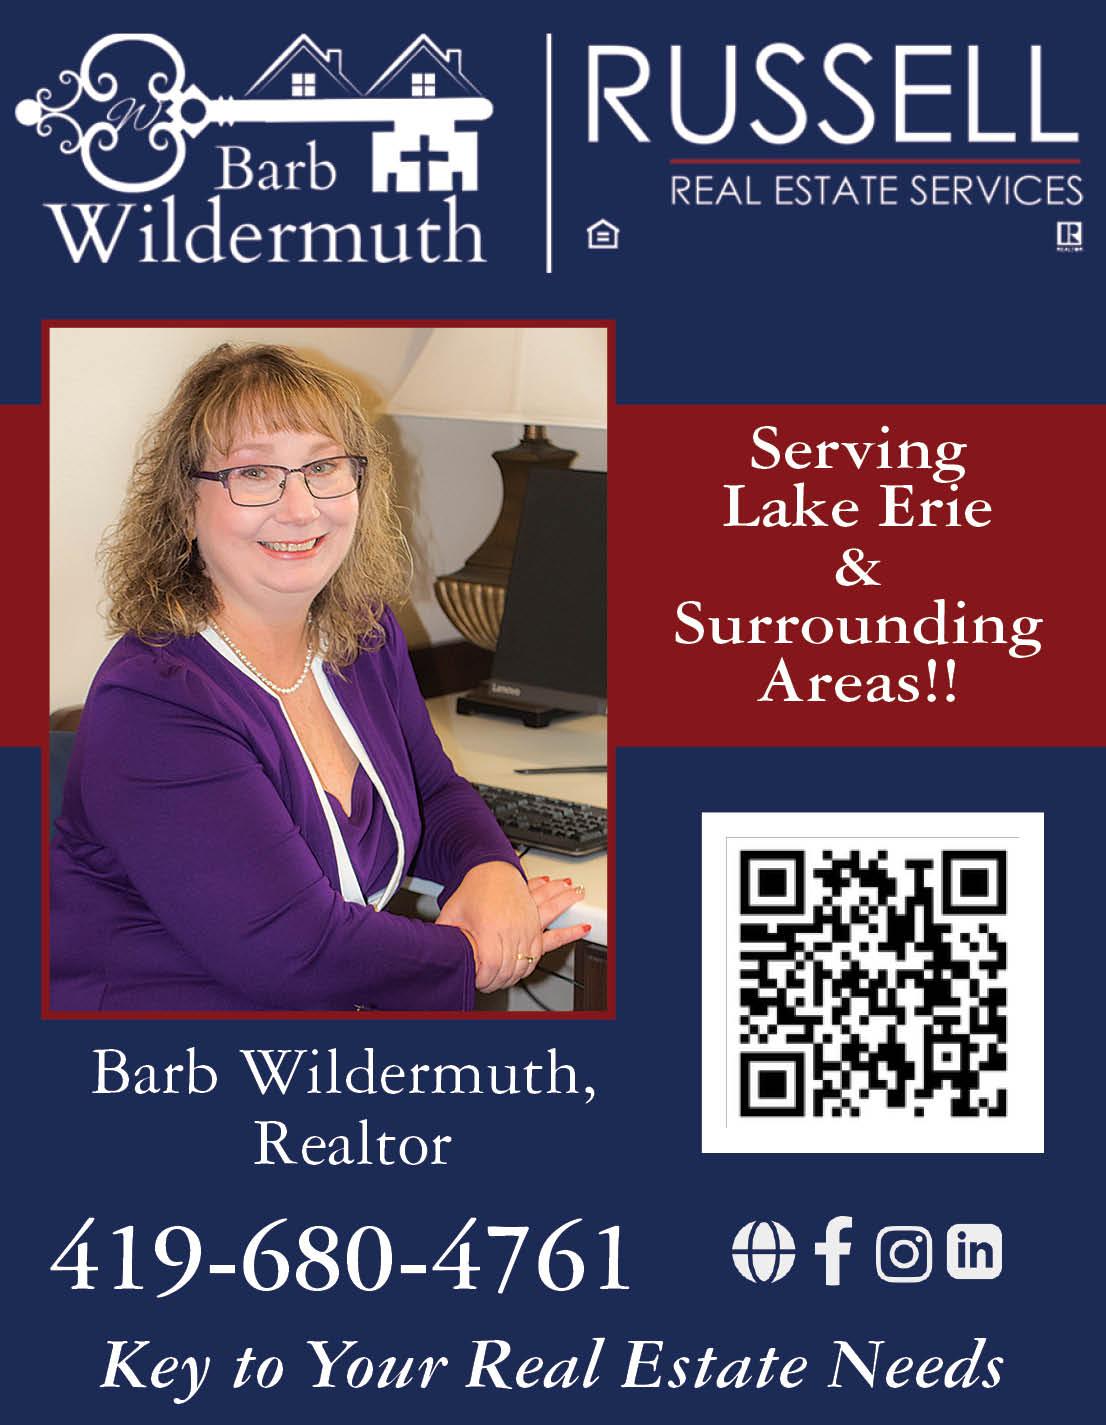 Barb Wildermuth ~ Russell Real Estate Services